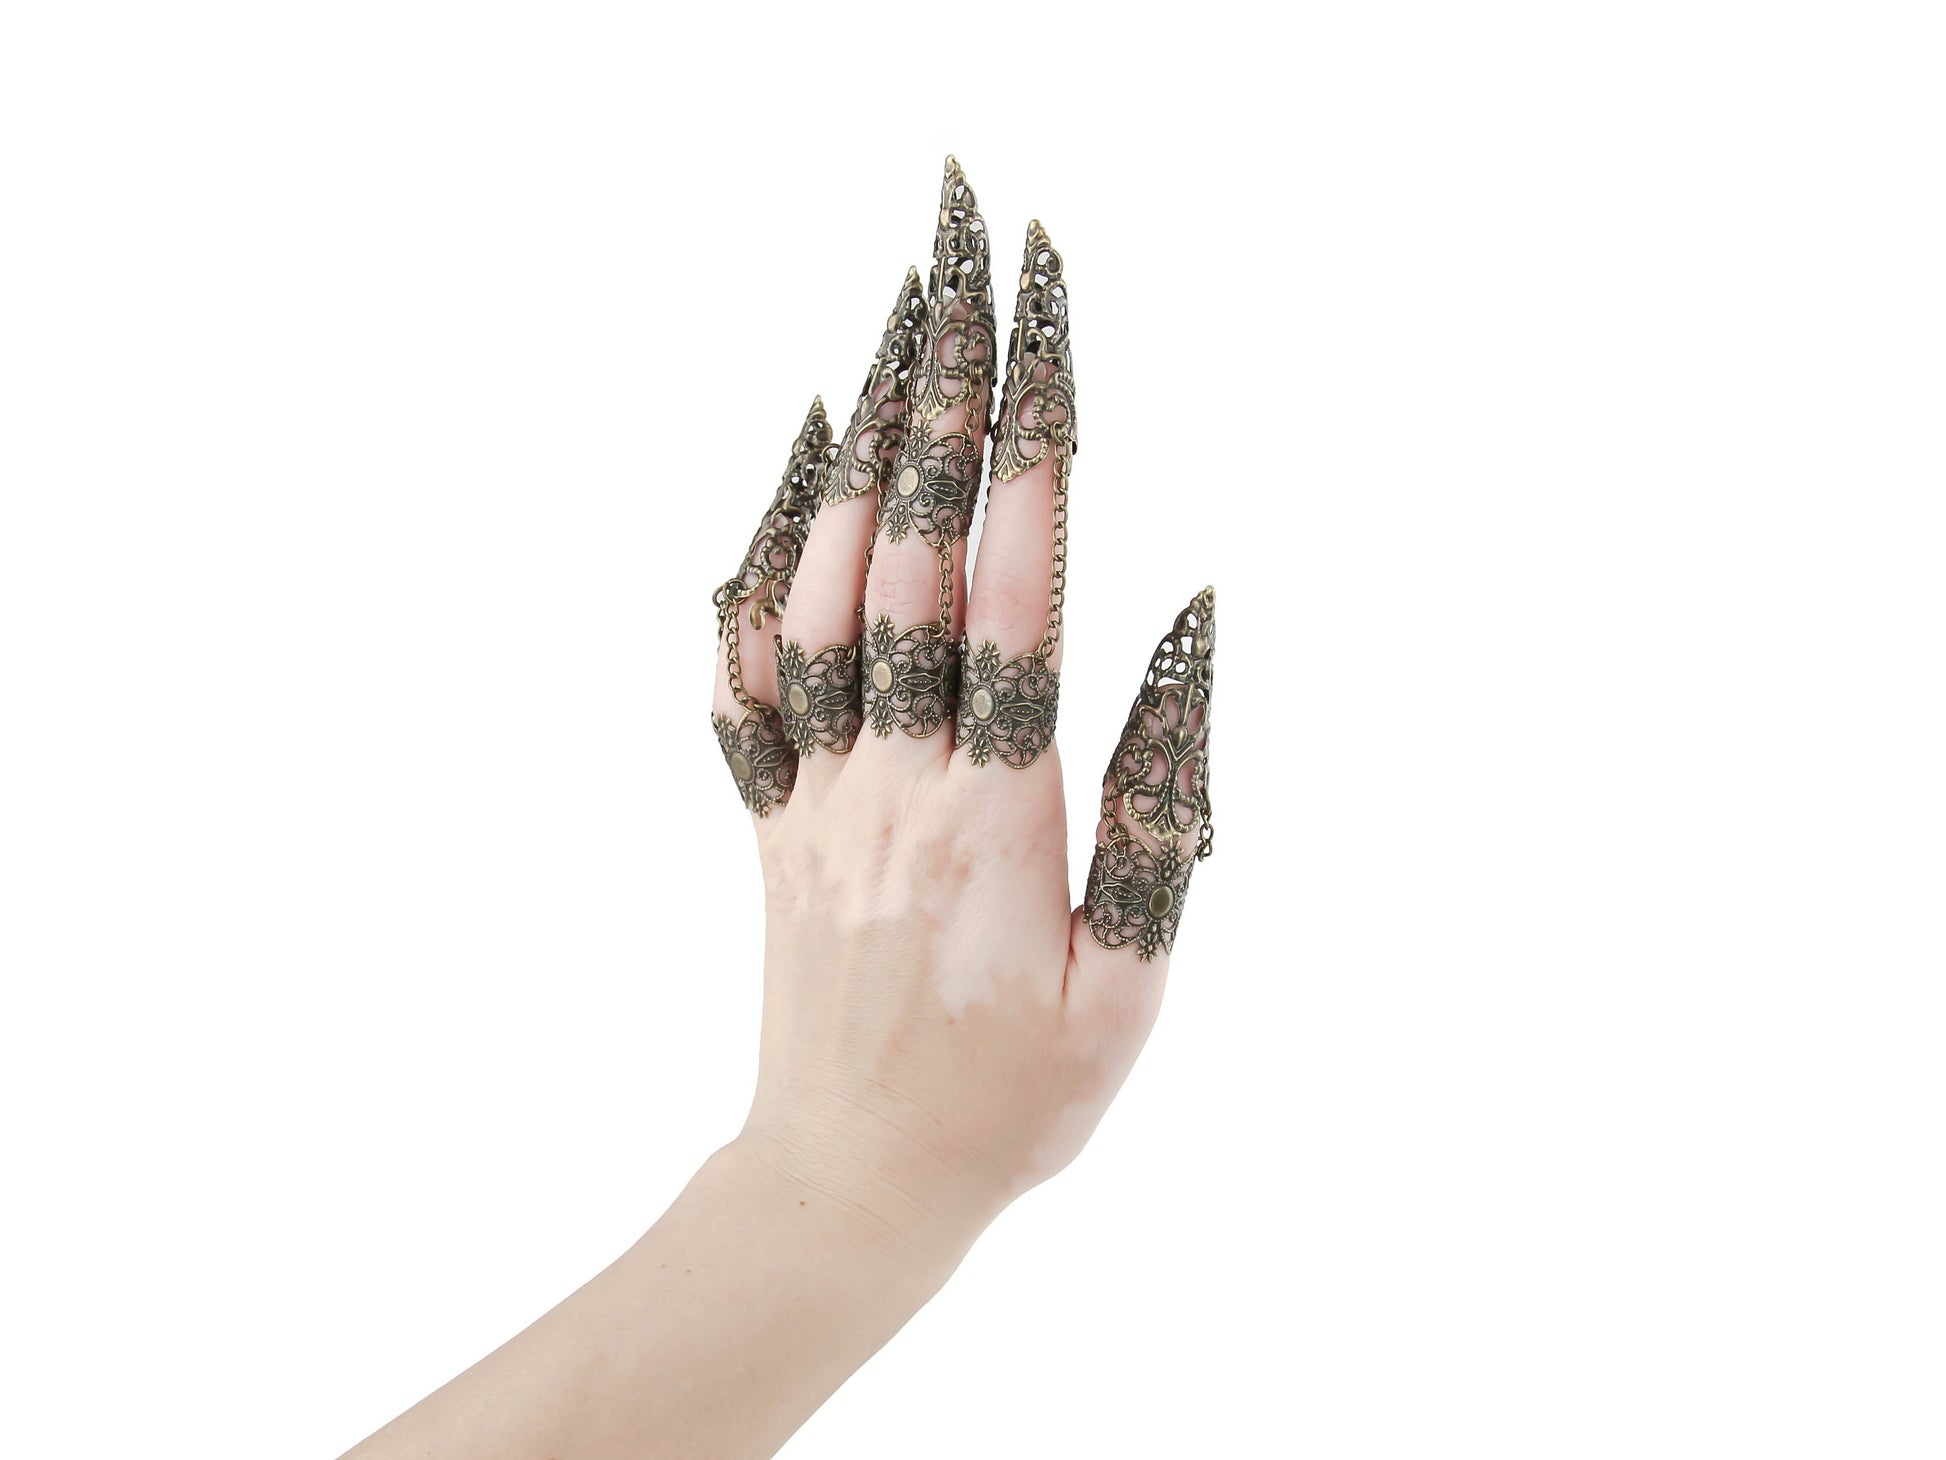 A striking set of bronze full-hand claw rings from Myril Jewels graces each finger with neo-goth intricacy. Designed for the dark-avantgarde and alternative style aficionado, these rings with claws are perfect for adding an edgy touch to Halloween or everyday minimal goth attire. The elaborate filigree work showcases the brand's commitment to gothic-chic elegance, making these claws a must-have for any witchcore, rave party, or festival jewel collection.